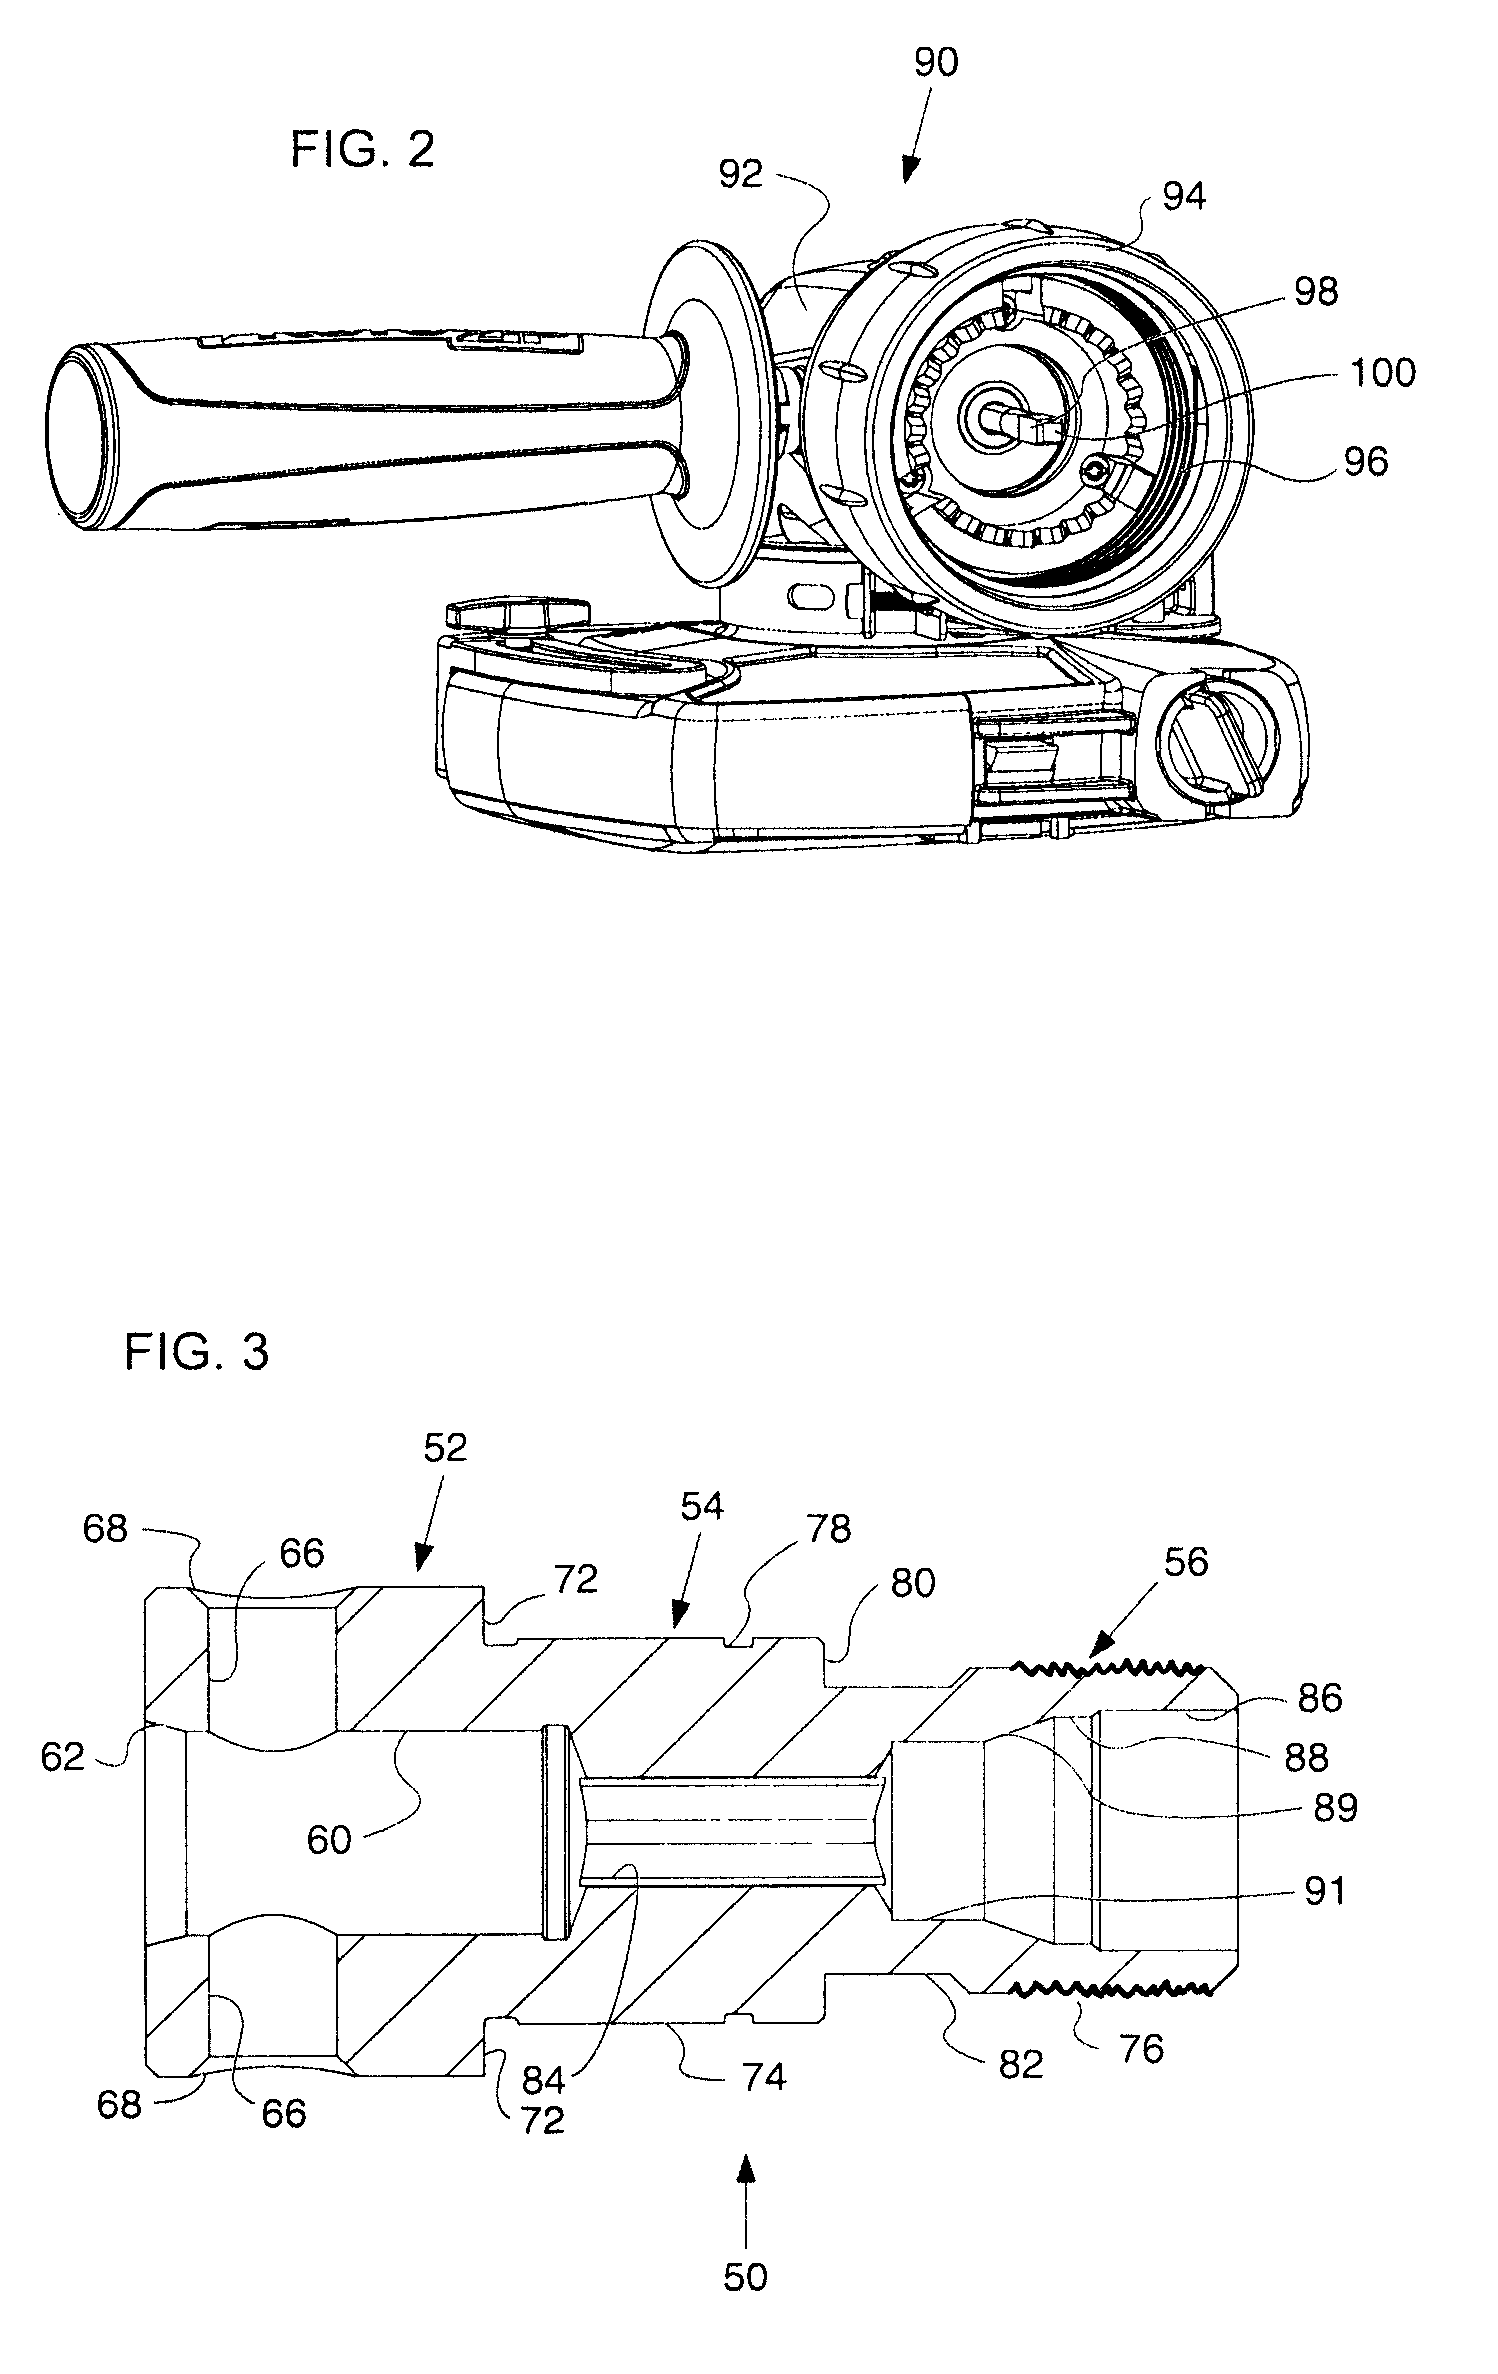 Drive system for interconnecting attachment devices and handheld rotary power tools